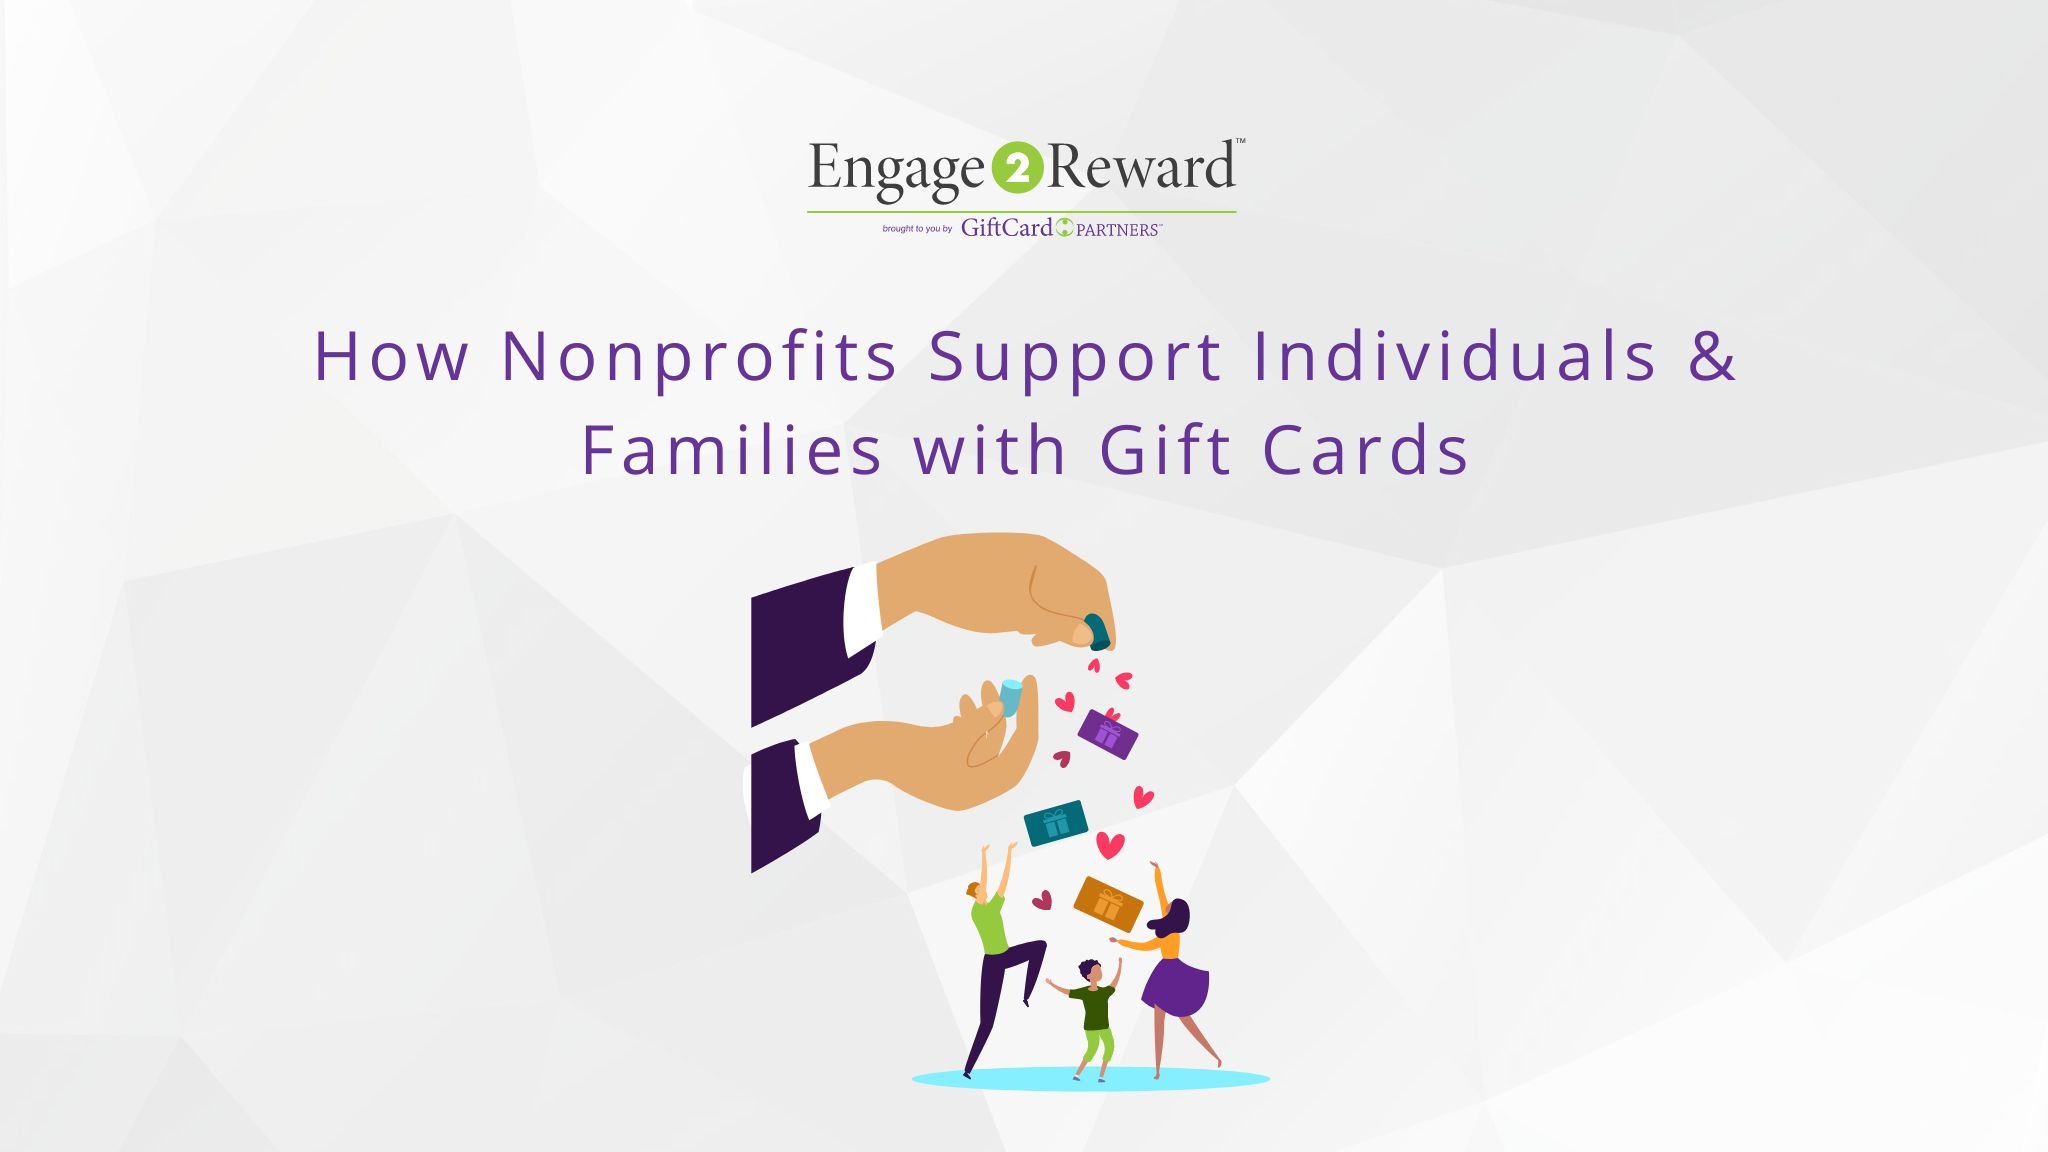 How Nonprofits Support Individuals & Families with Gift Cards